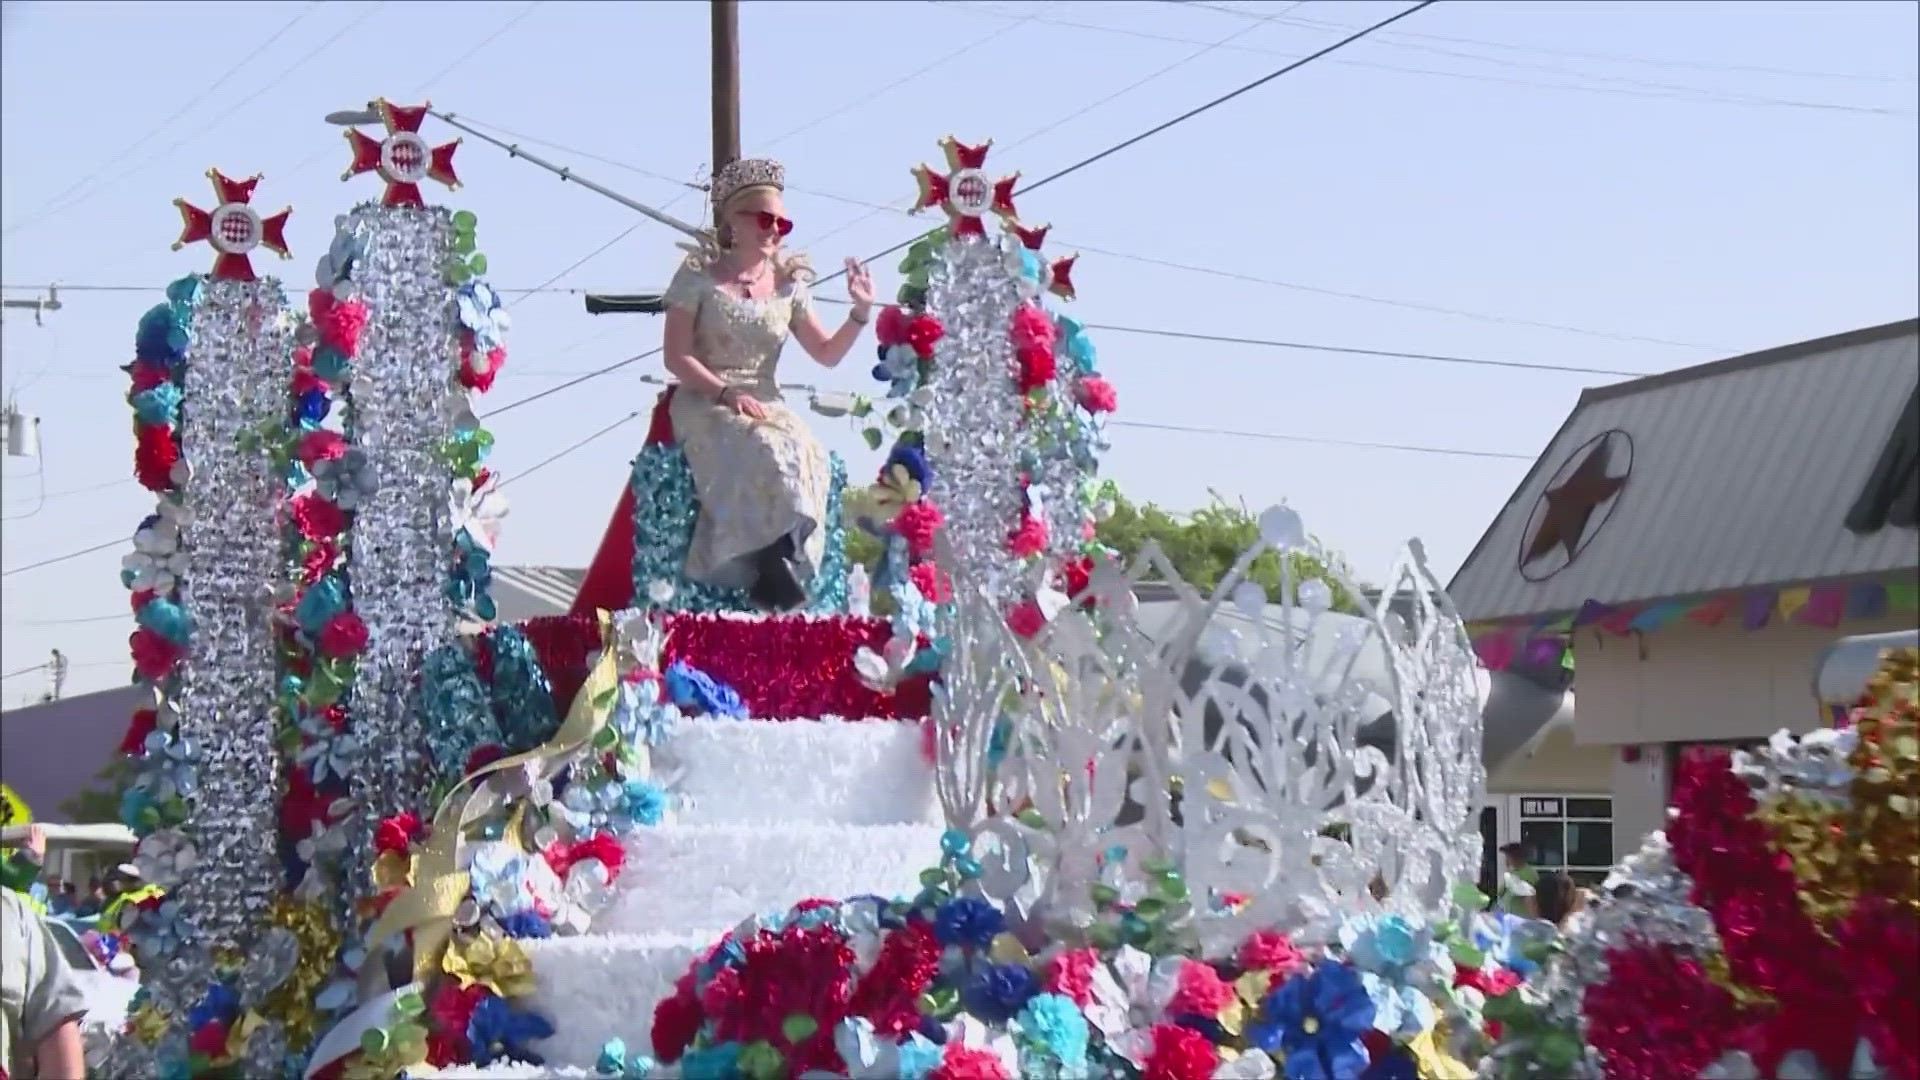 Downtown streets are being closed for the annual Battle of Flowers Parade on Friday morning.